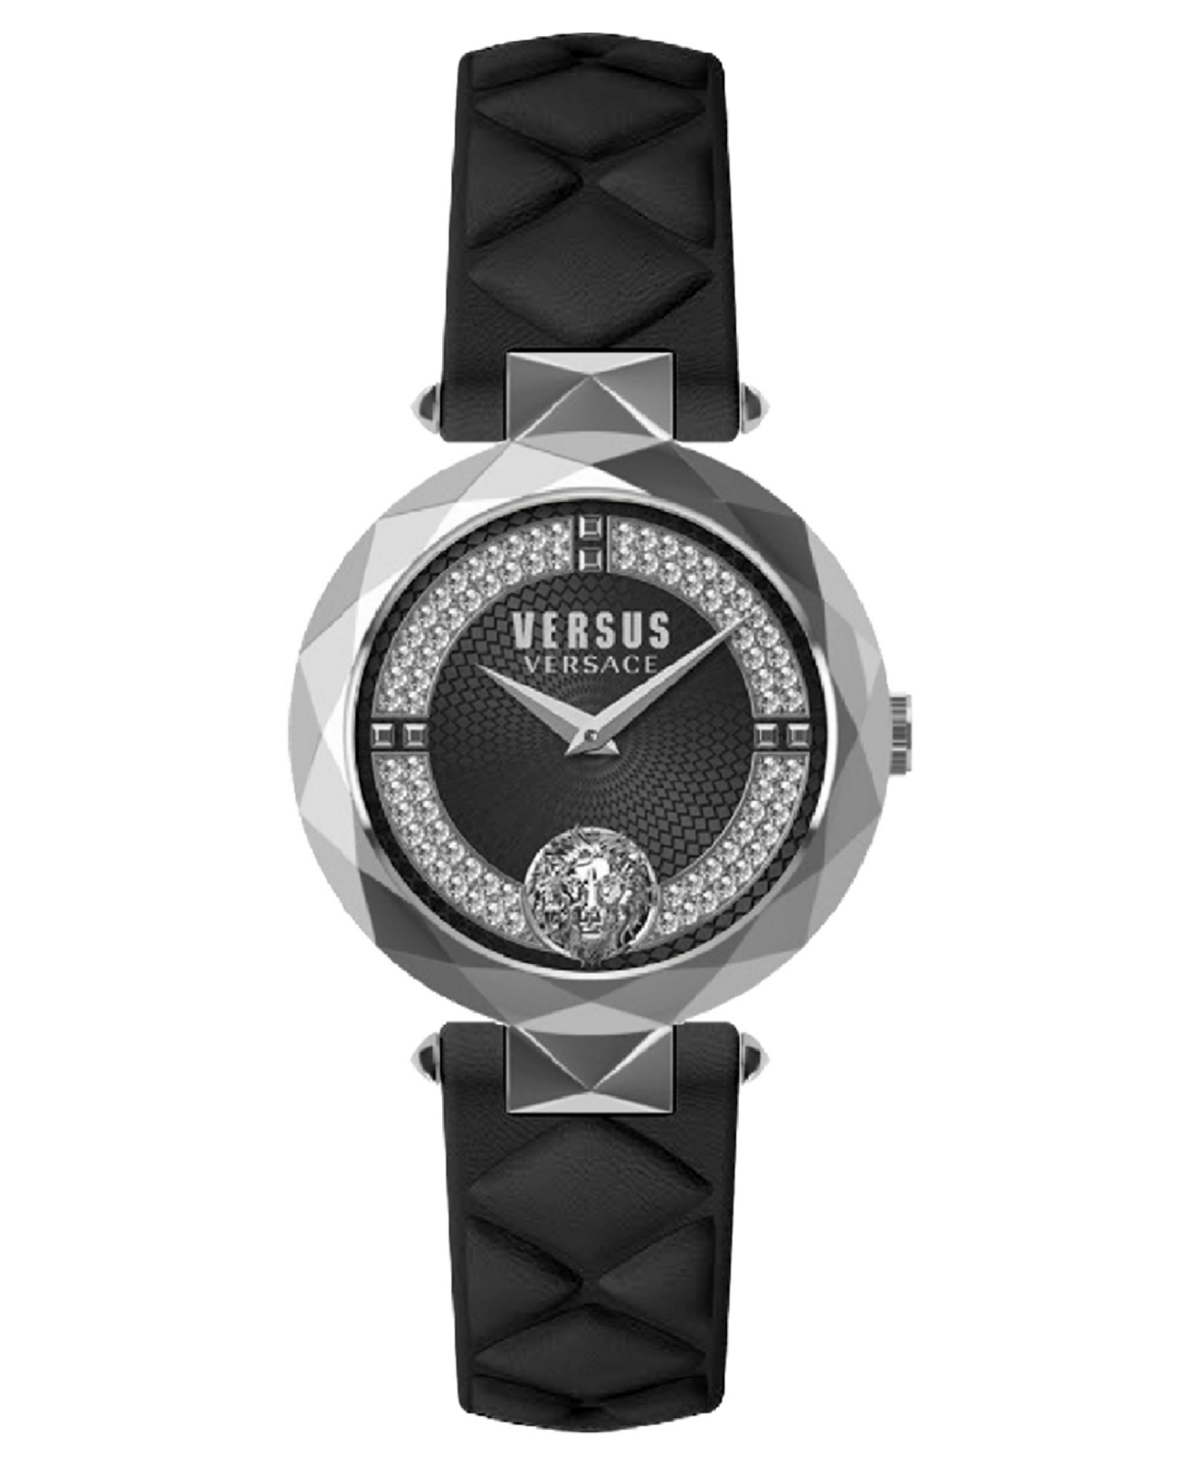 Versus by Versace Women's Covent Garden Black Leather Strap Watch 36mm - Stainless